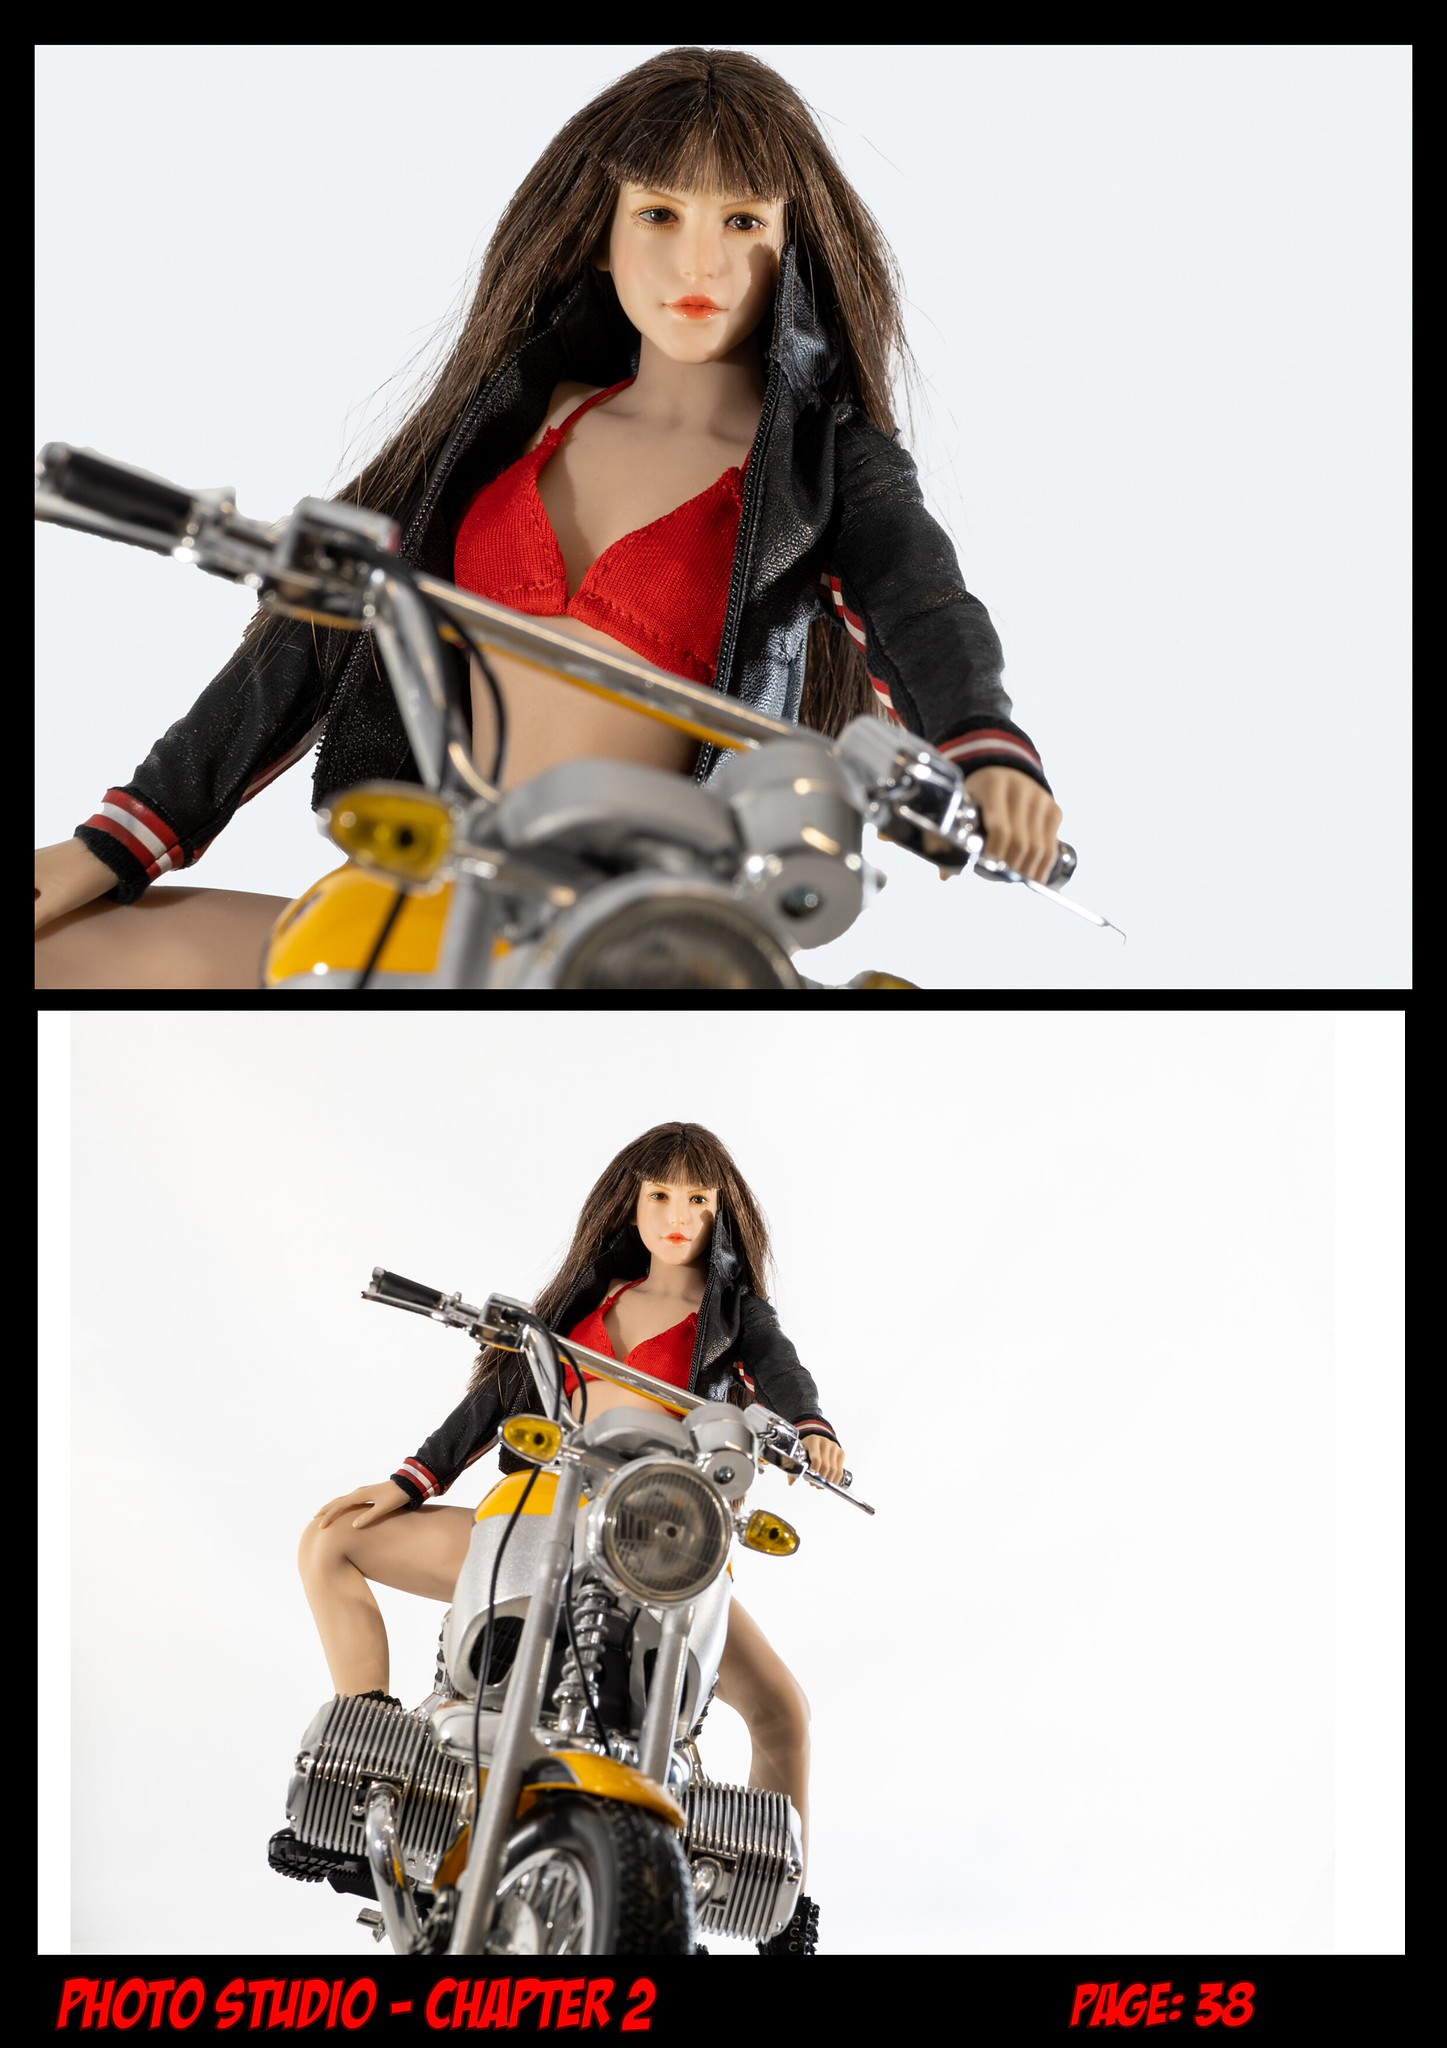 Photo Studio - Chapter two... Bring in the bikes... 51215441562_c01995d60e_k